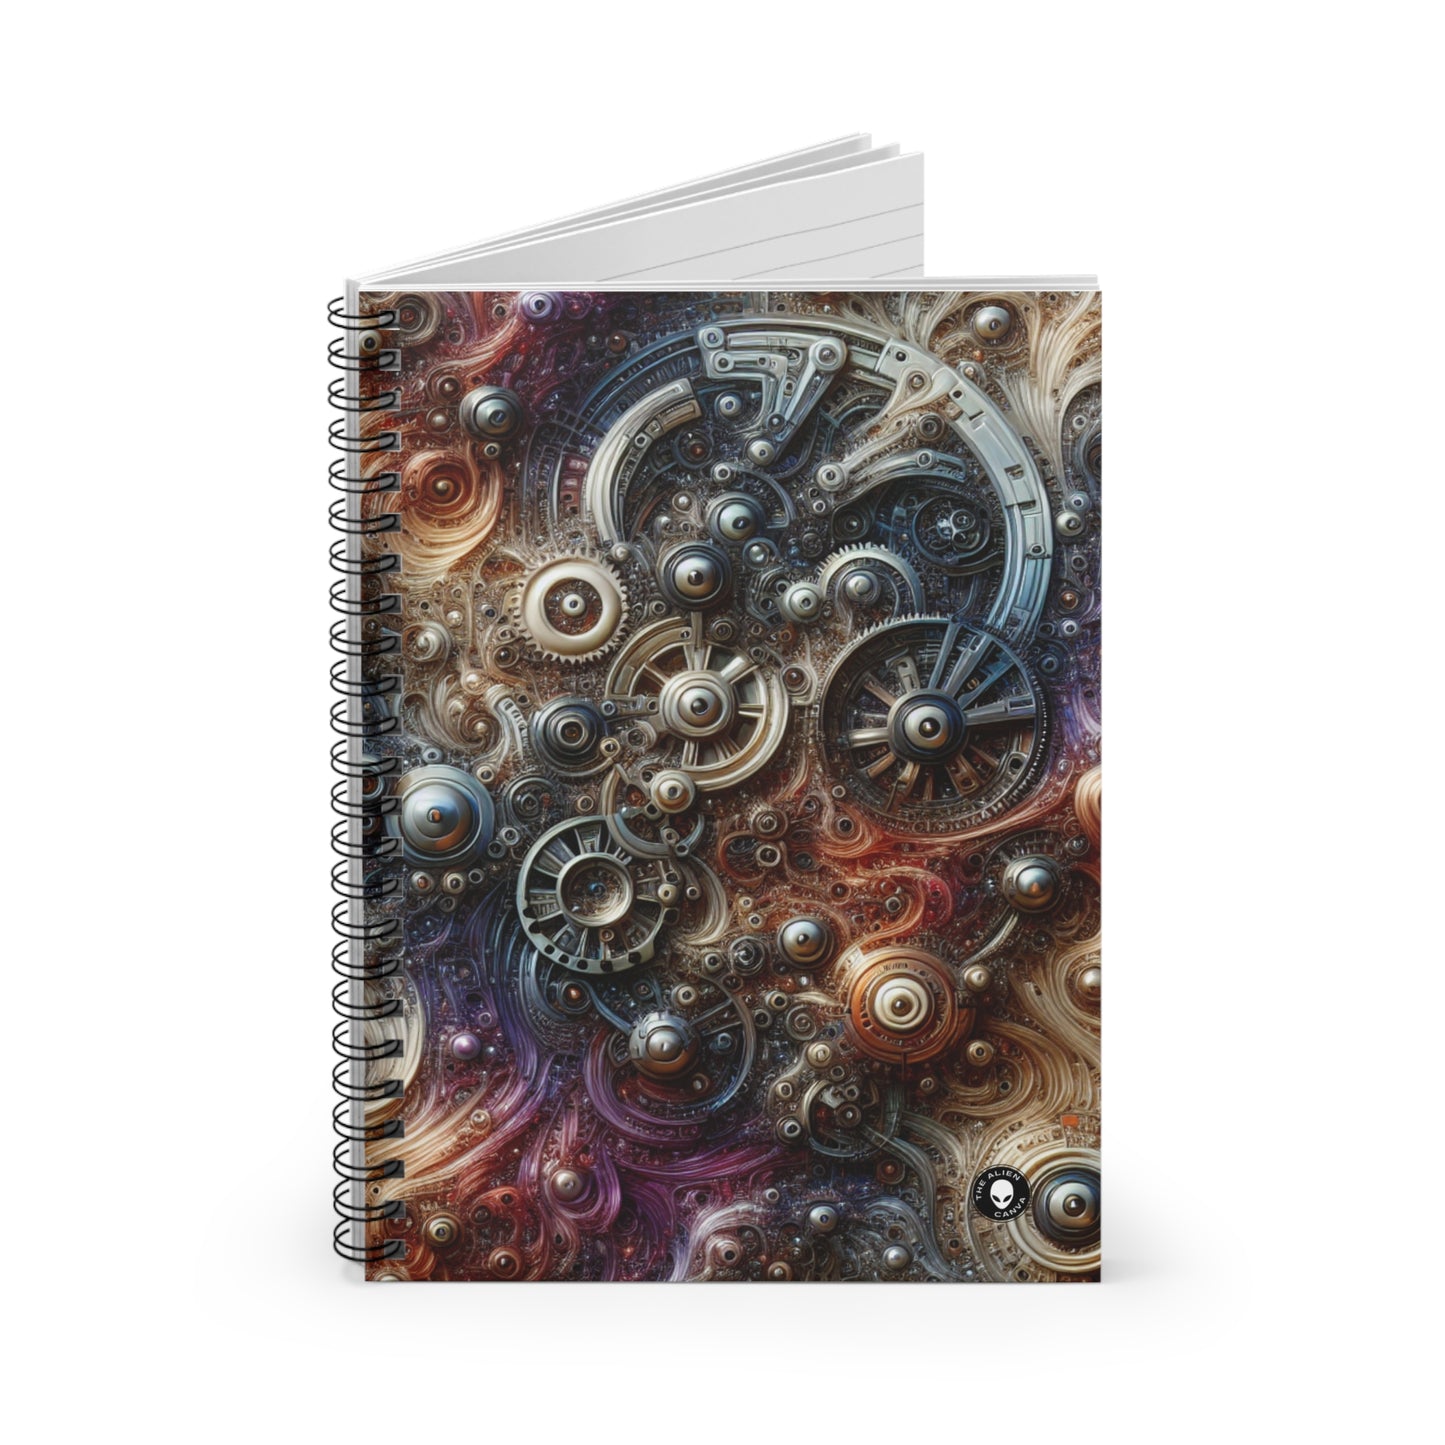 "Cybernetic Sentinel: A Futuristic Fusion of Man and Machine" - The Alien Spiral Notebook (Ruled Line) Bio-mechanical Art